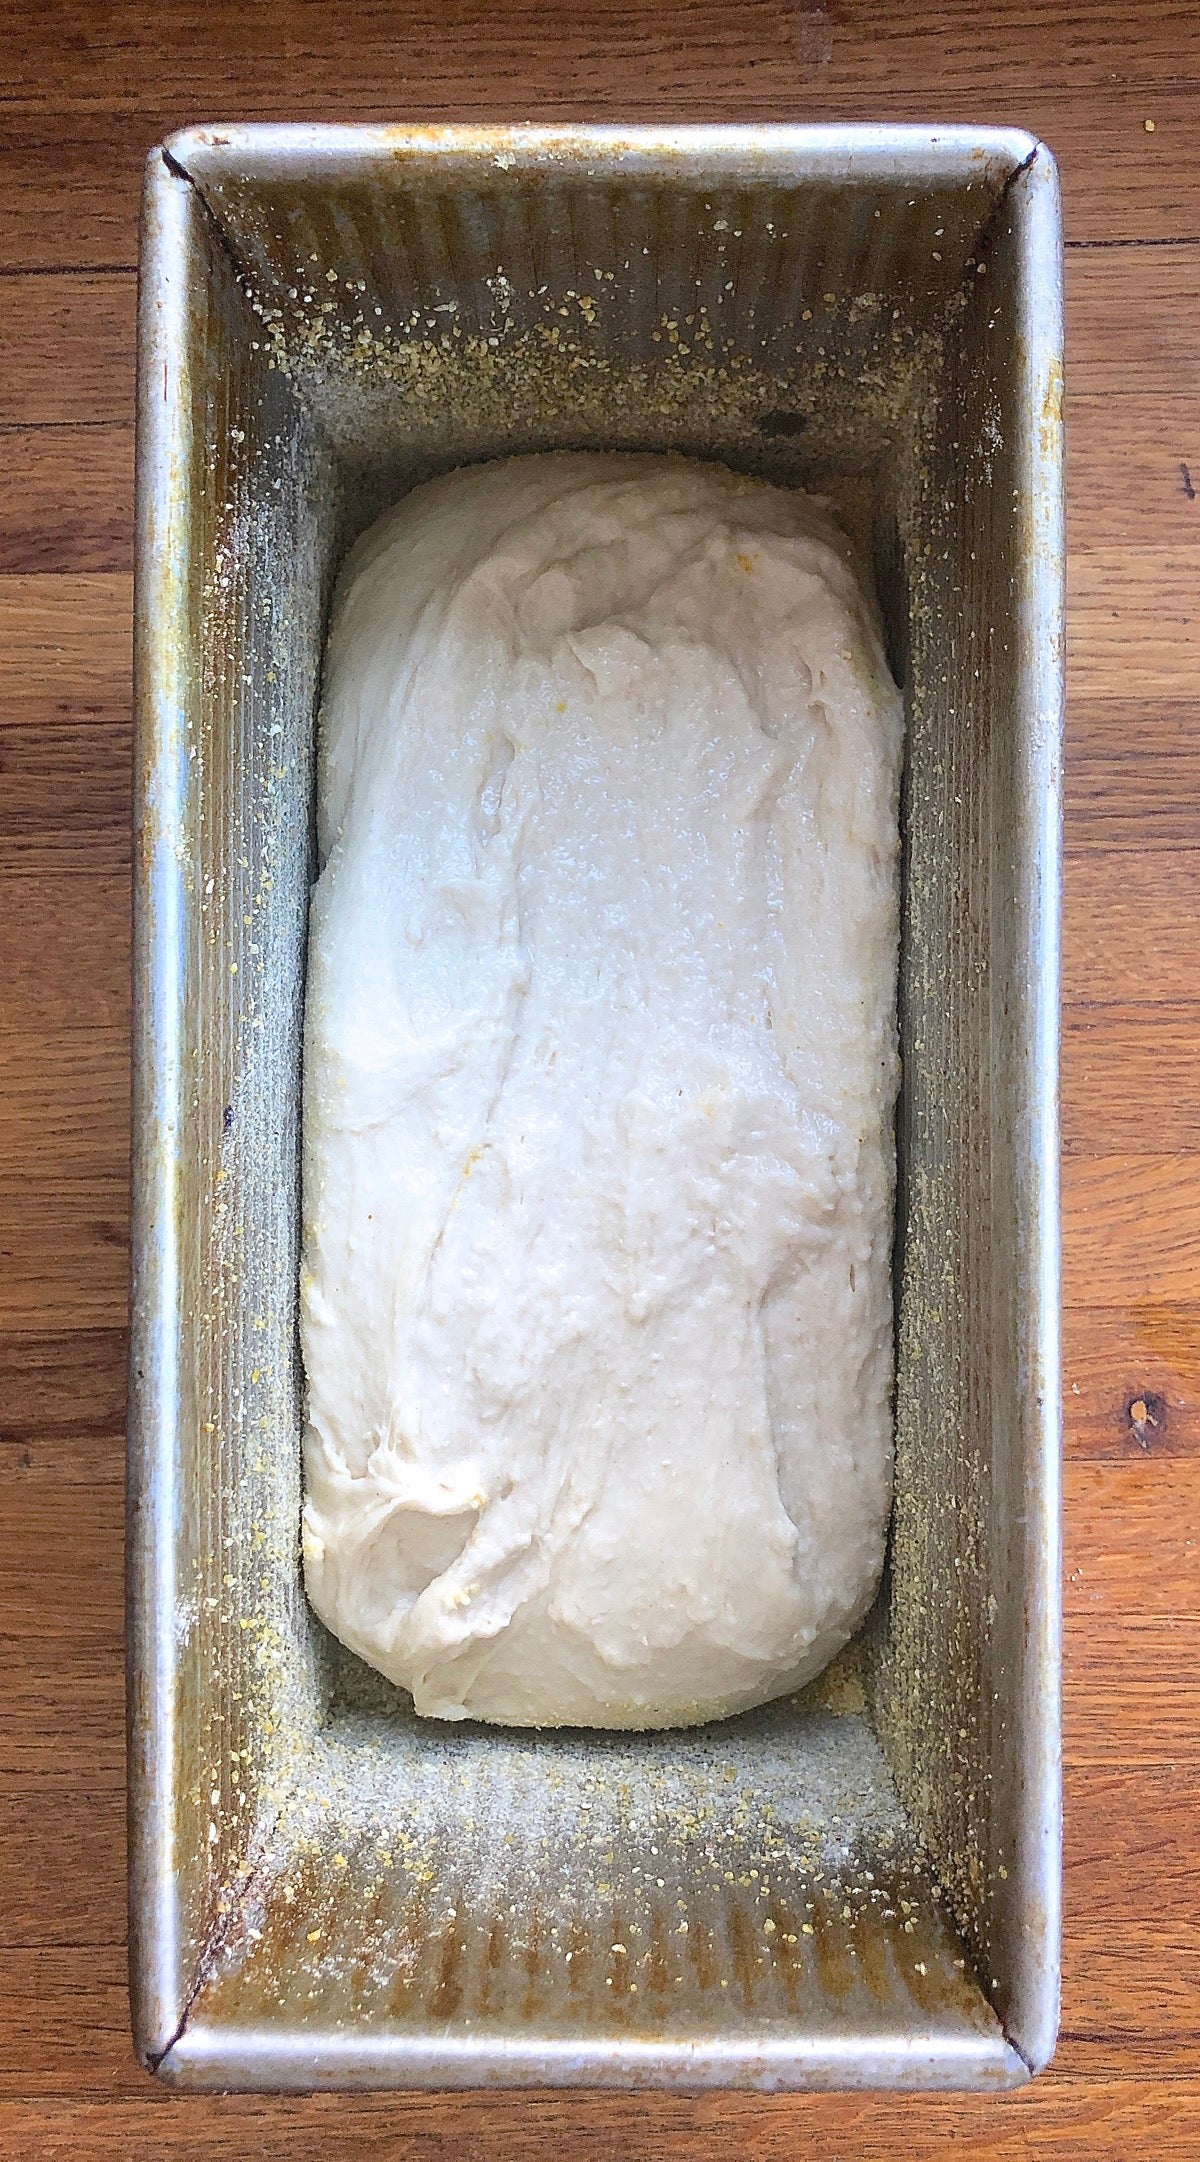 Bread dough spread into a loaf pan, ready to rise.